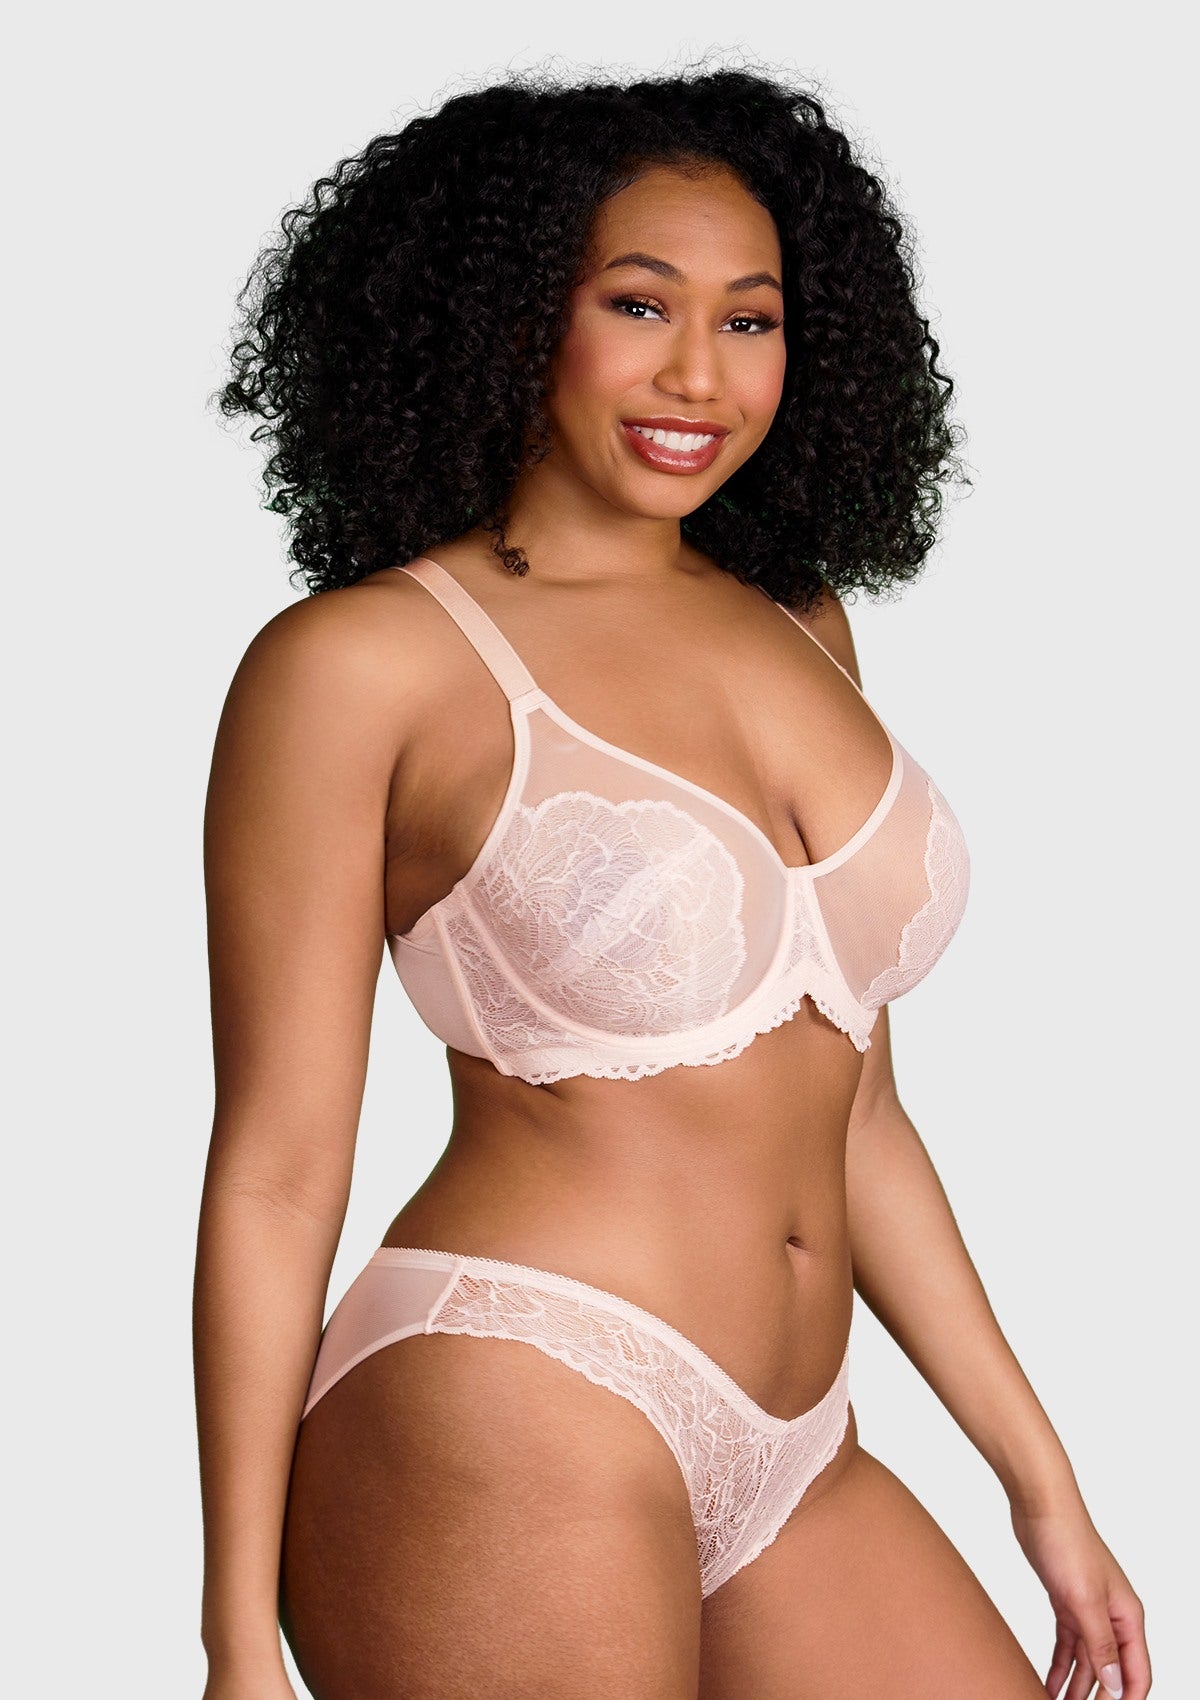 HSIA Blossom Sheer Lace Bra: Comfortable Underwire Bra For Big Busts - White / 46 / C